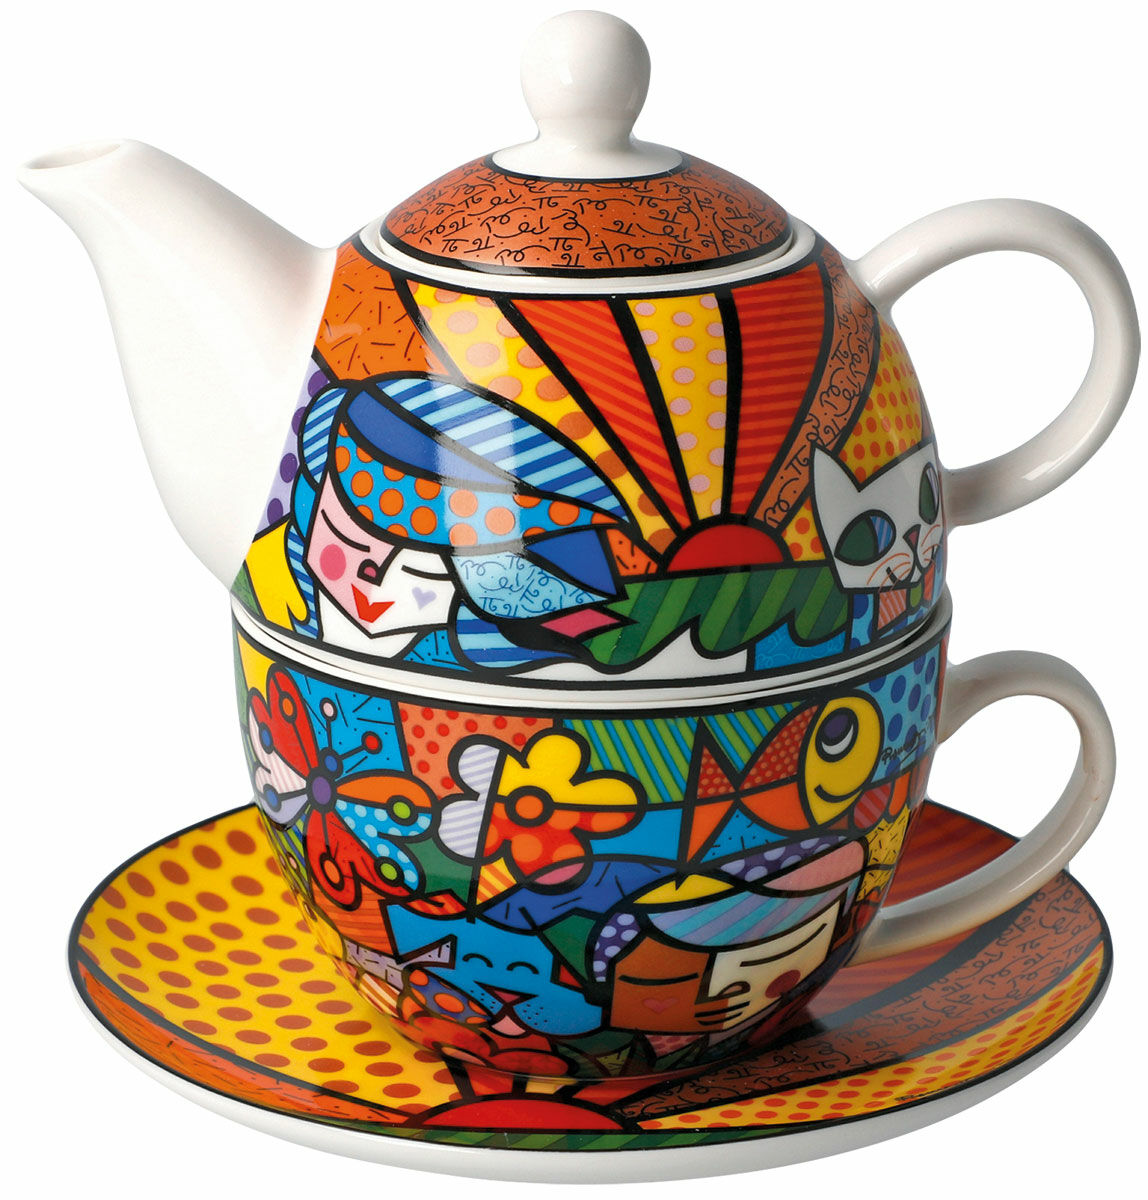 Teapot with an integrated cup "Garden", Porcelain by Romero Britto